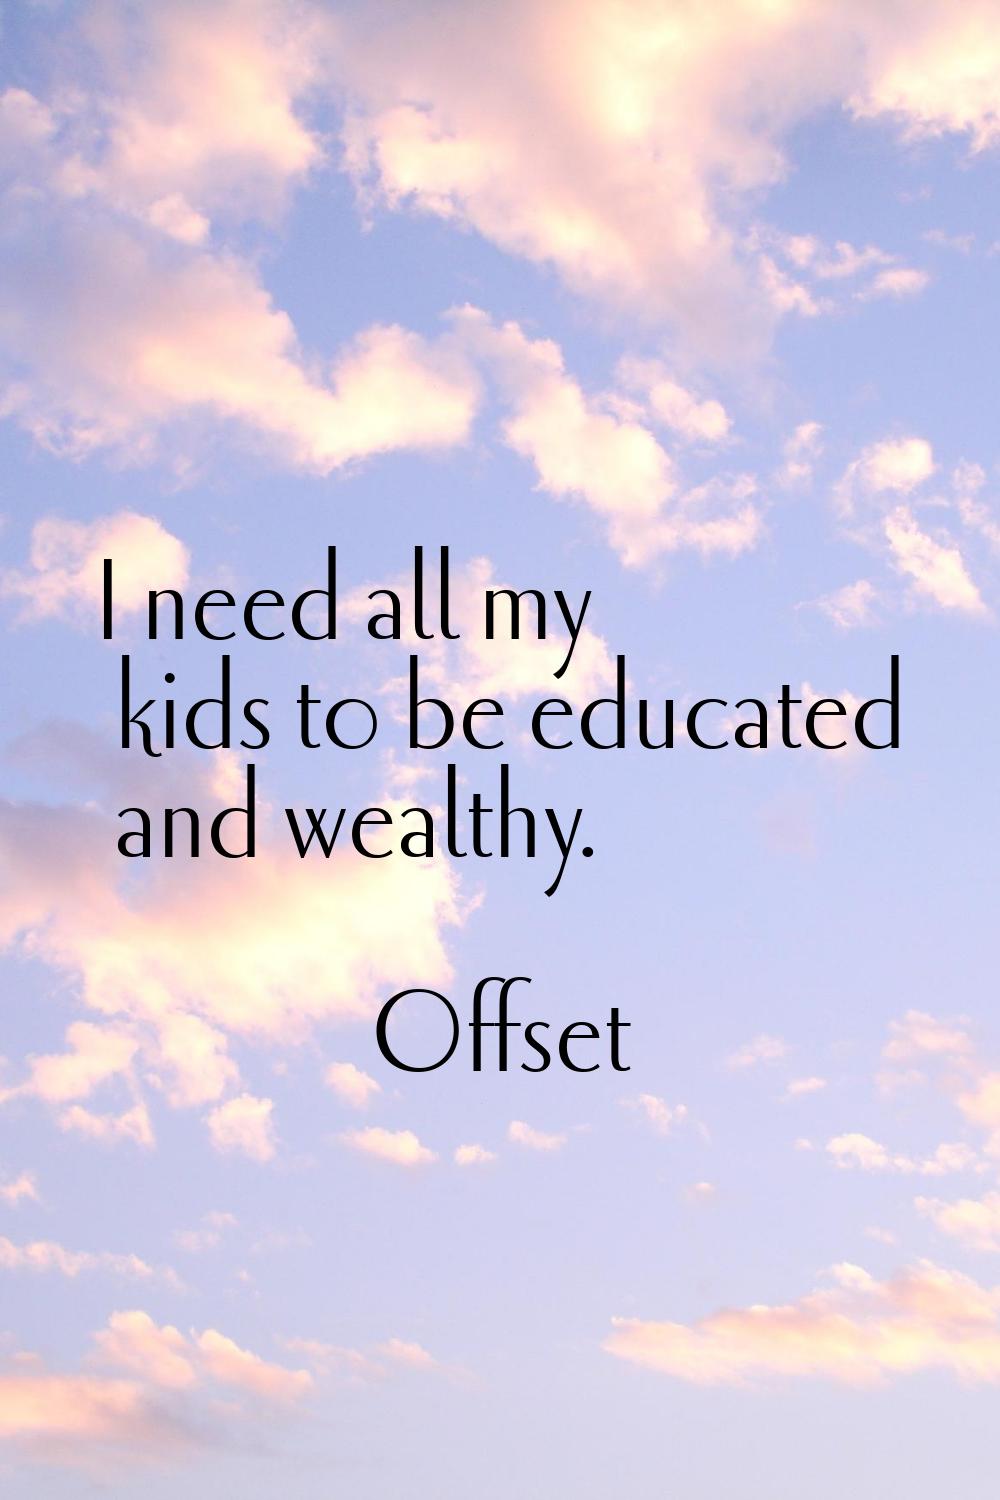 I need all my kids to be educated and wealthy.